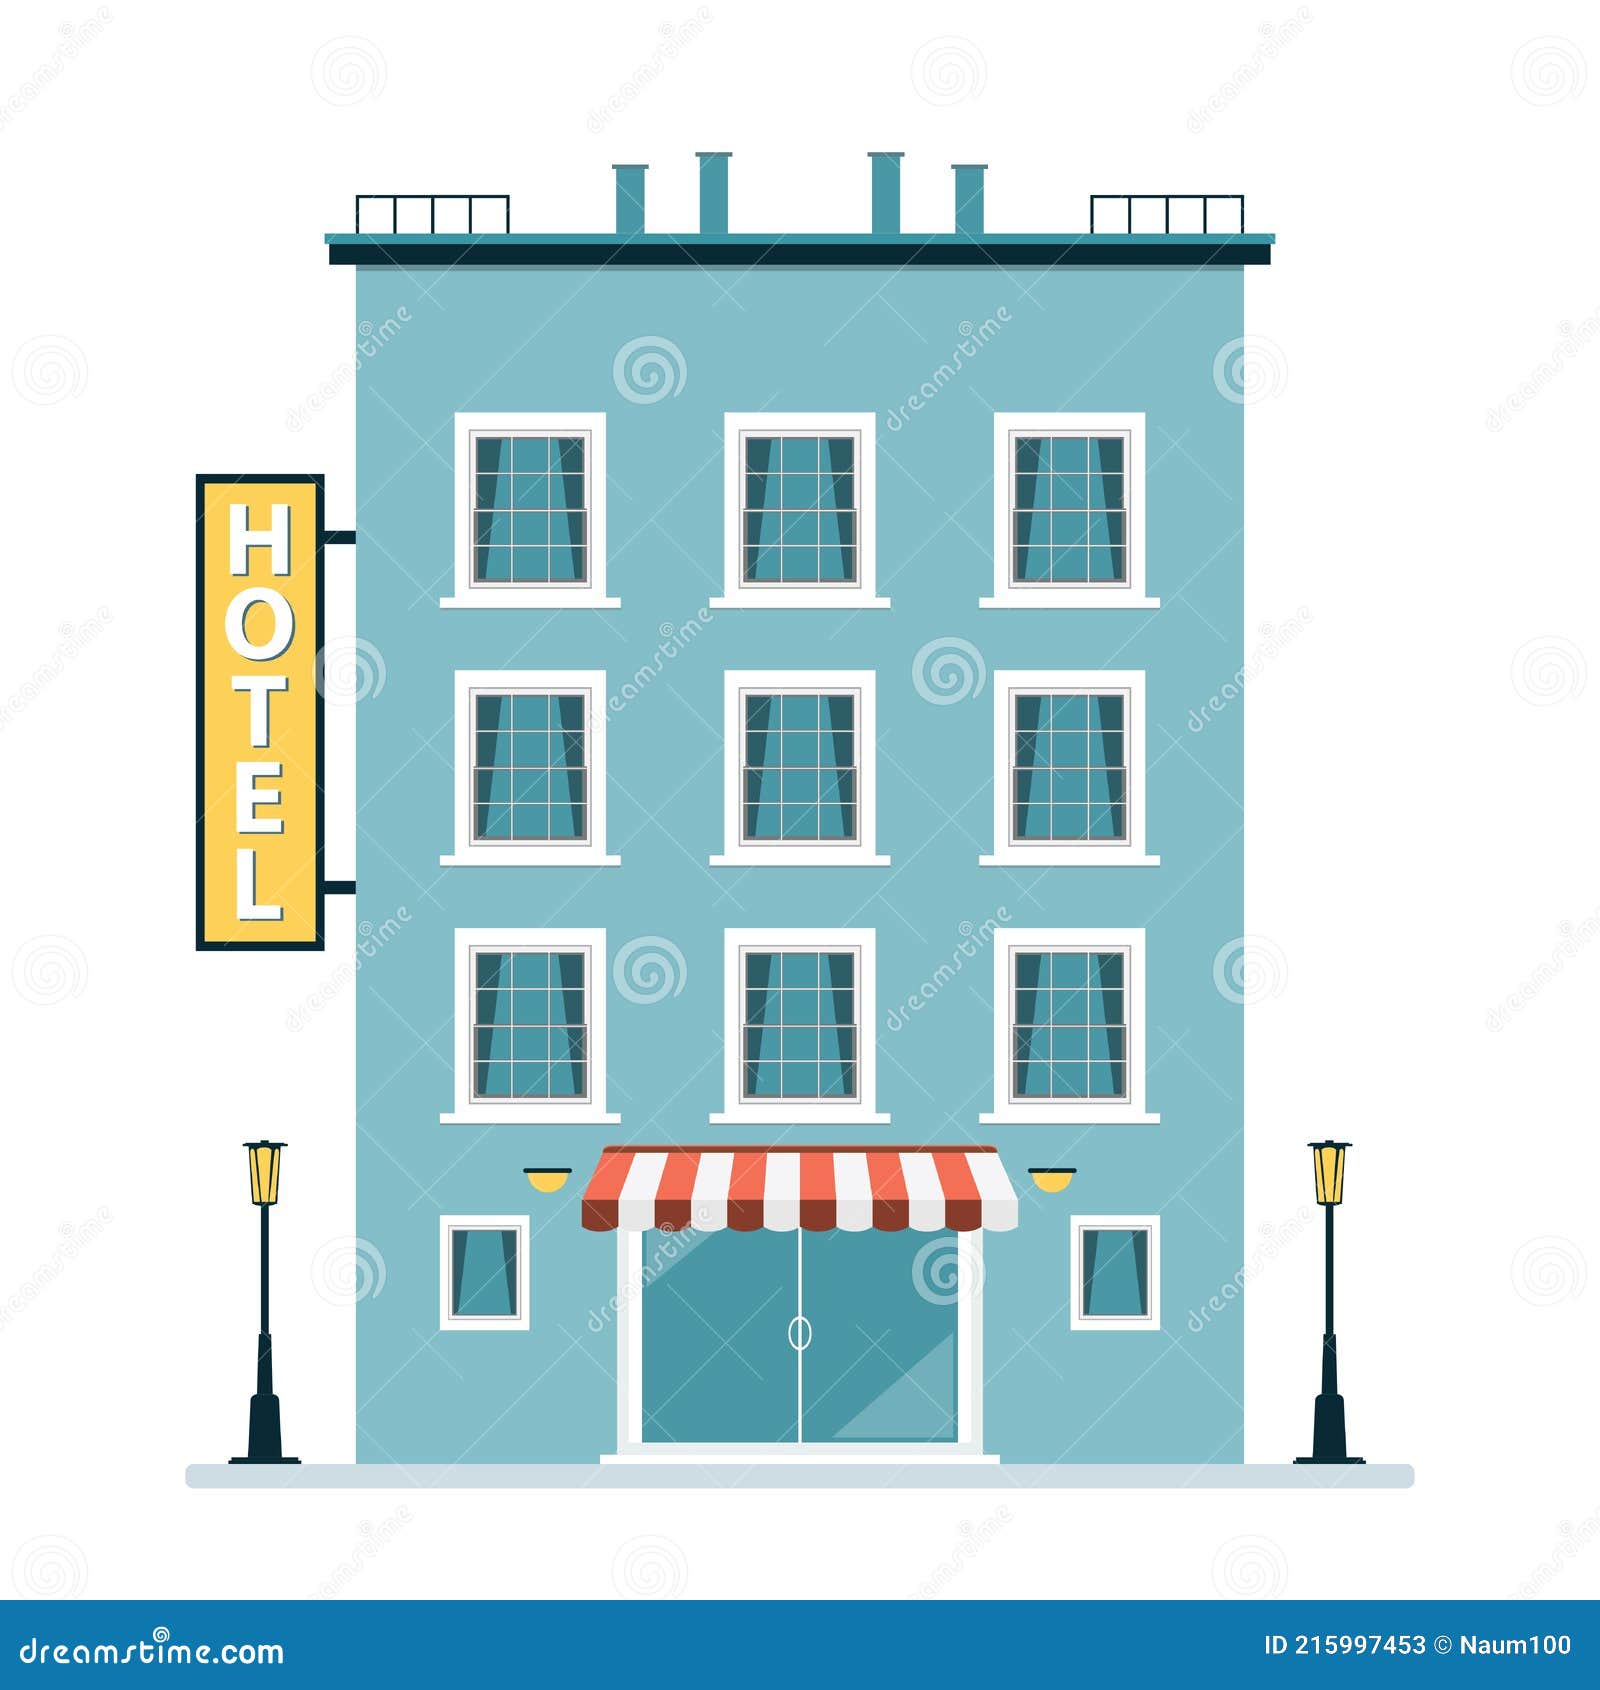 Cartoon Hotel Building. Hostel or Apartment Isolated on White Background  Stock Vector - Illustration of city, exterior: 215997453